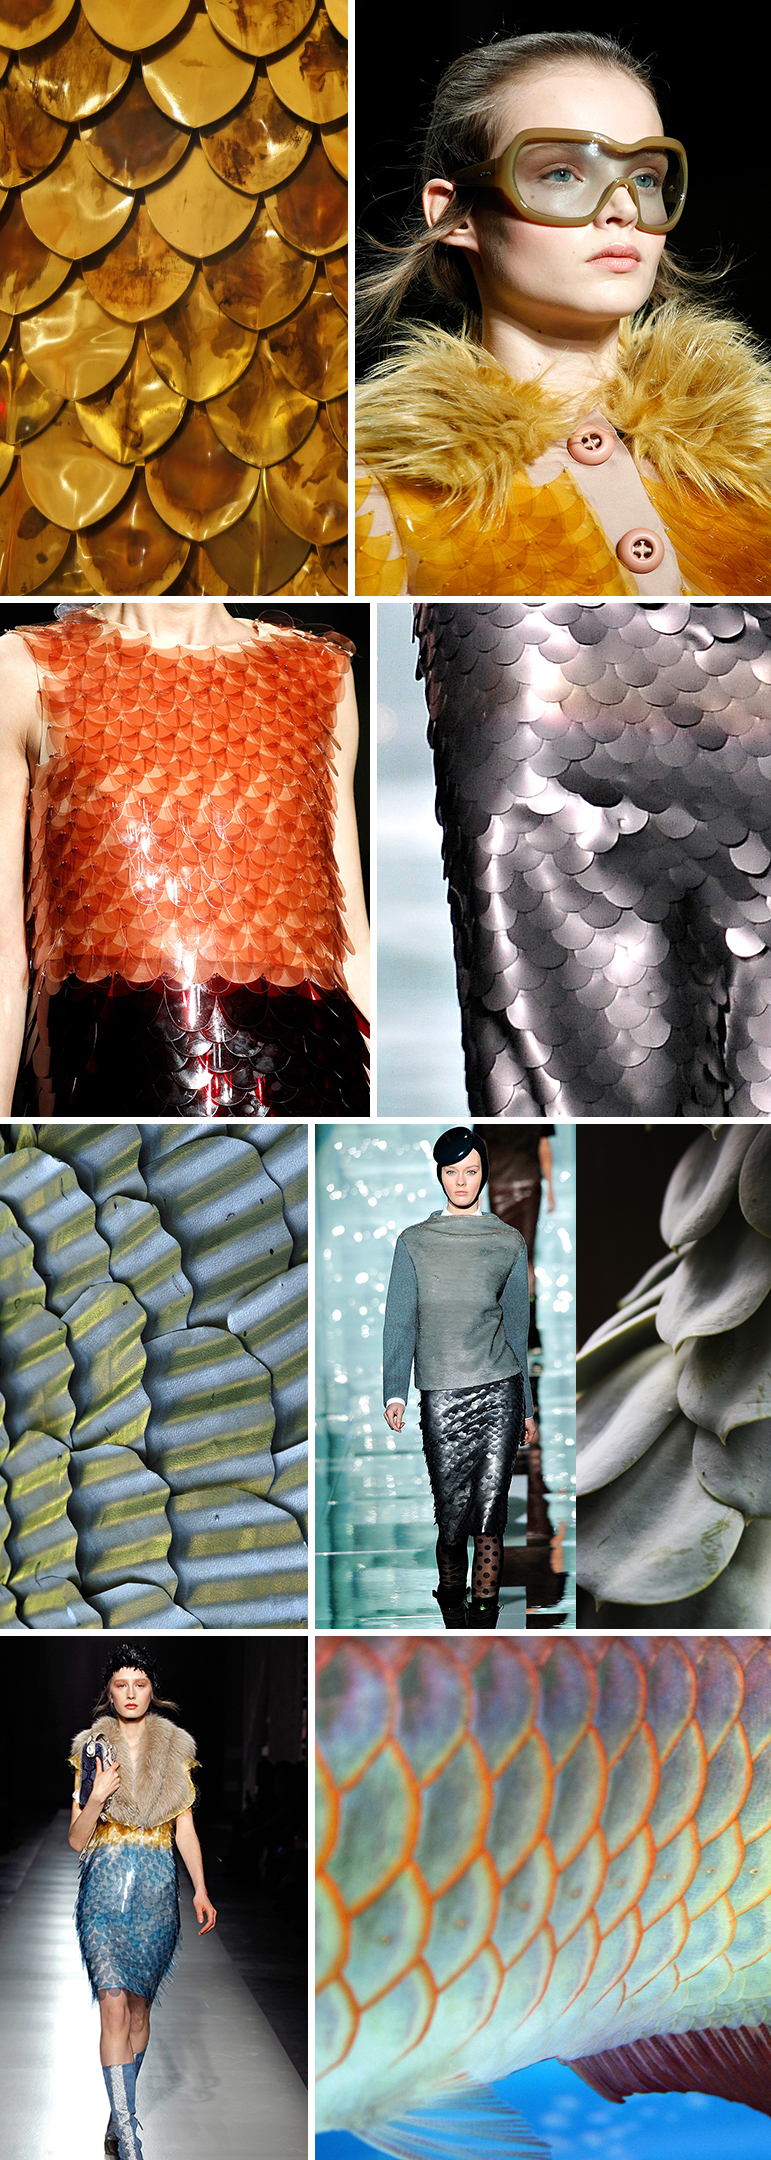 found patterns: fish scales - Pattern Observer